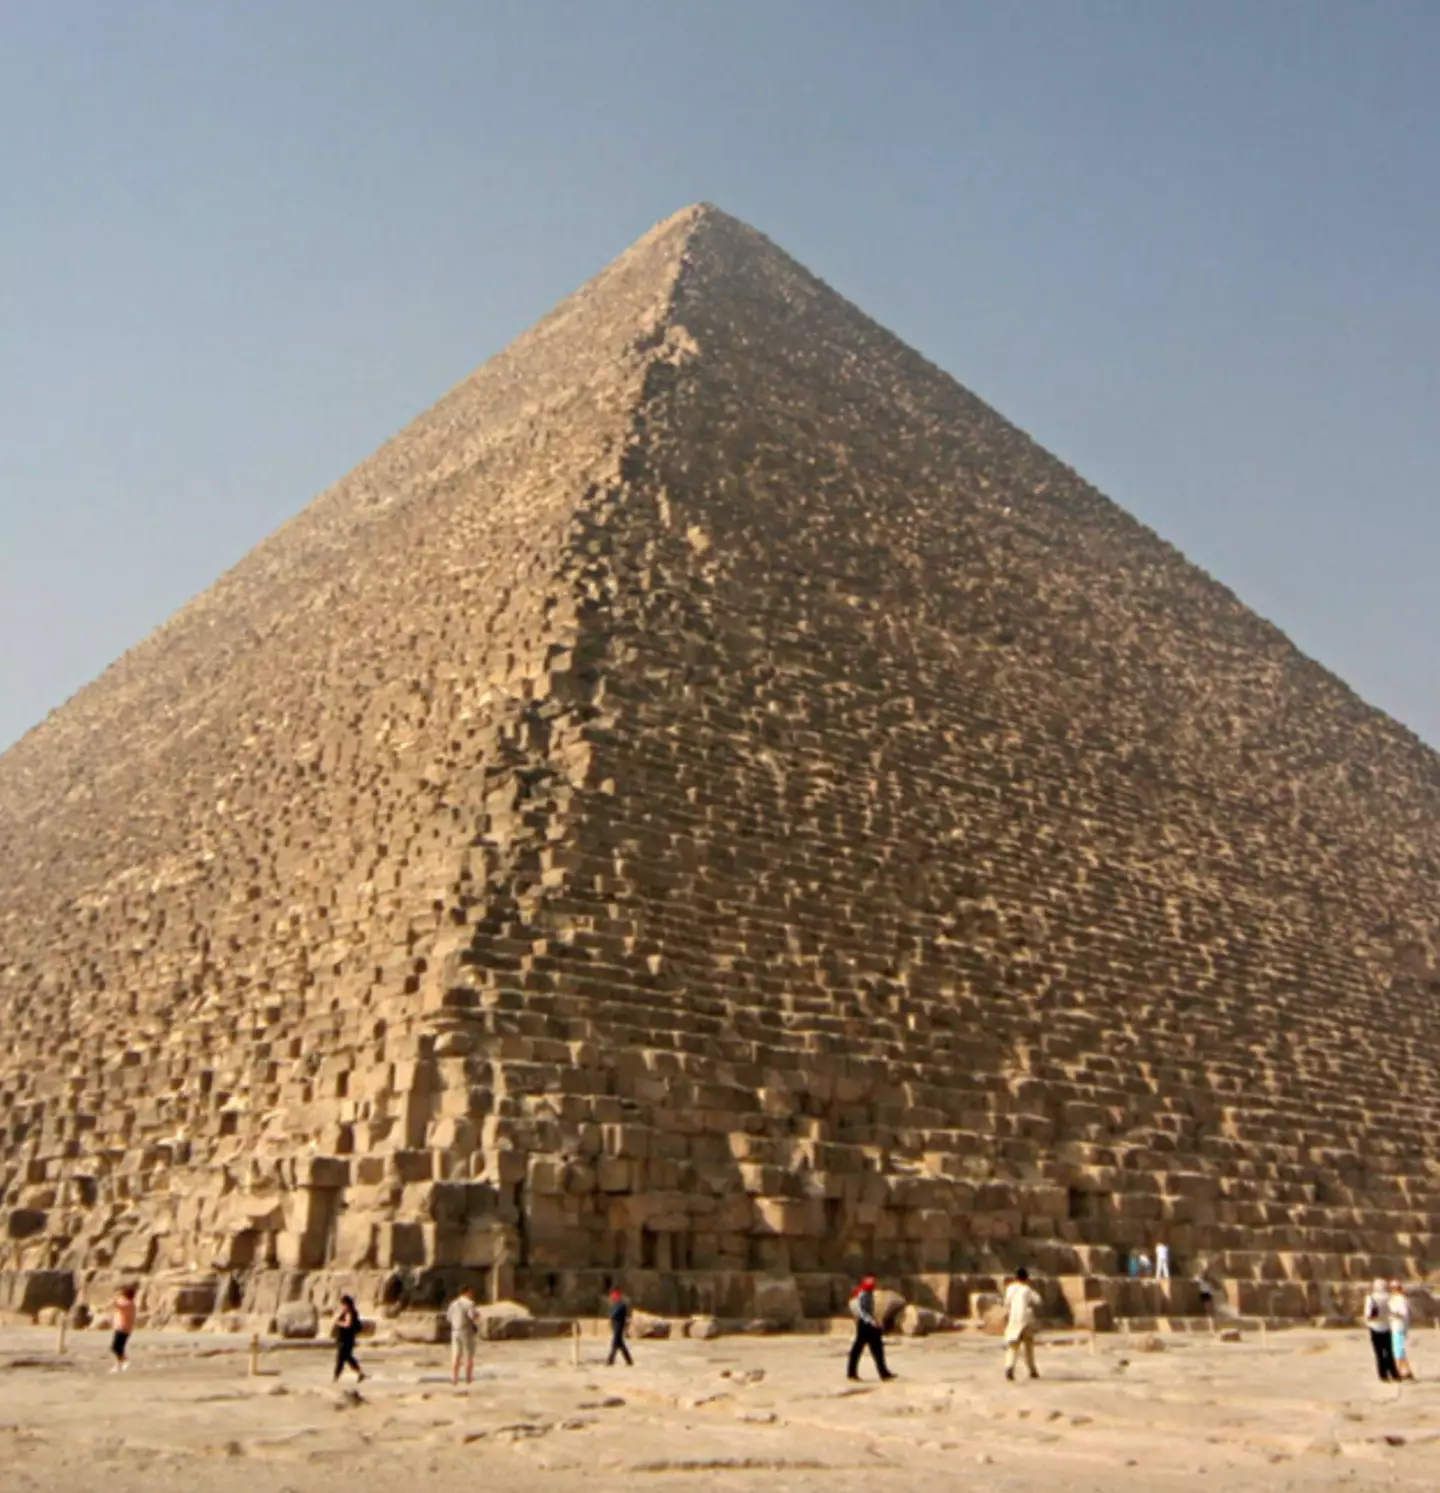 The Great Pyramid of Giza is missing a capstone.